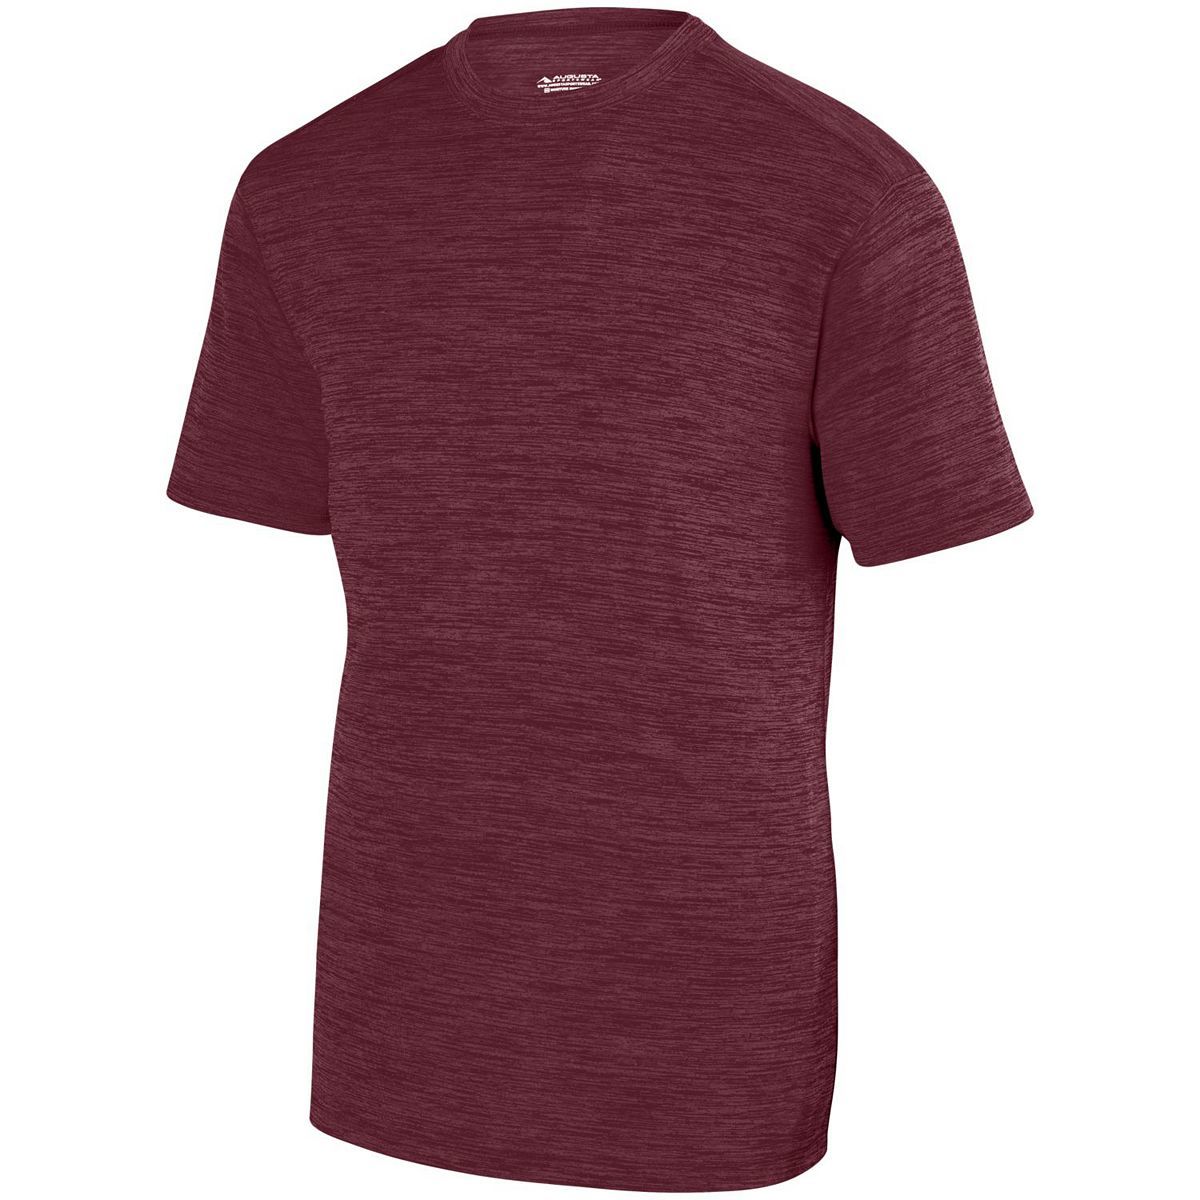 Augusta Sportswear Youth Shadow Tonal Heather Training Tee in Maroon  -Part of the Youth, Youth-Tee-Shirt, T-Shirts, Augusta-Products, Shirts, Tonal-Fleece-Collection product lines at KanaleyCreations.com